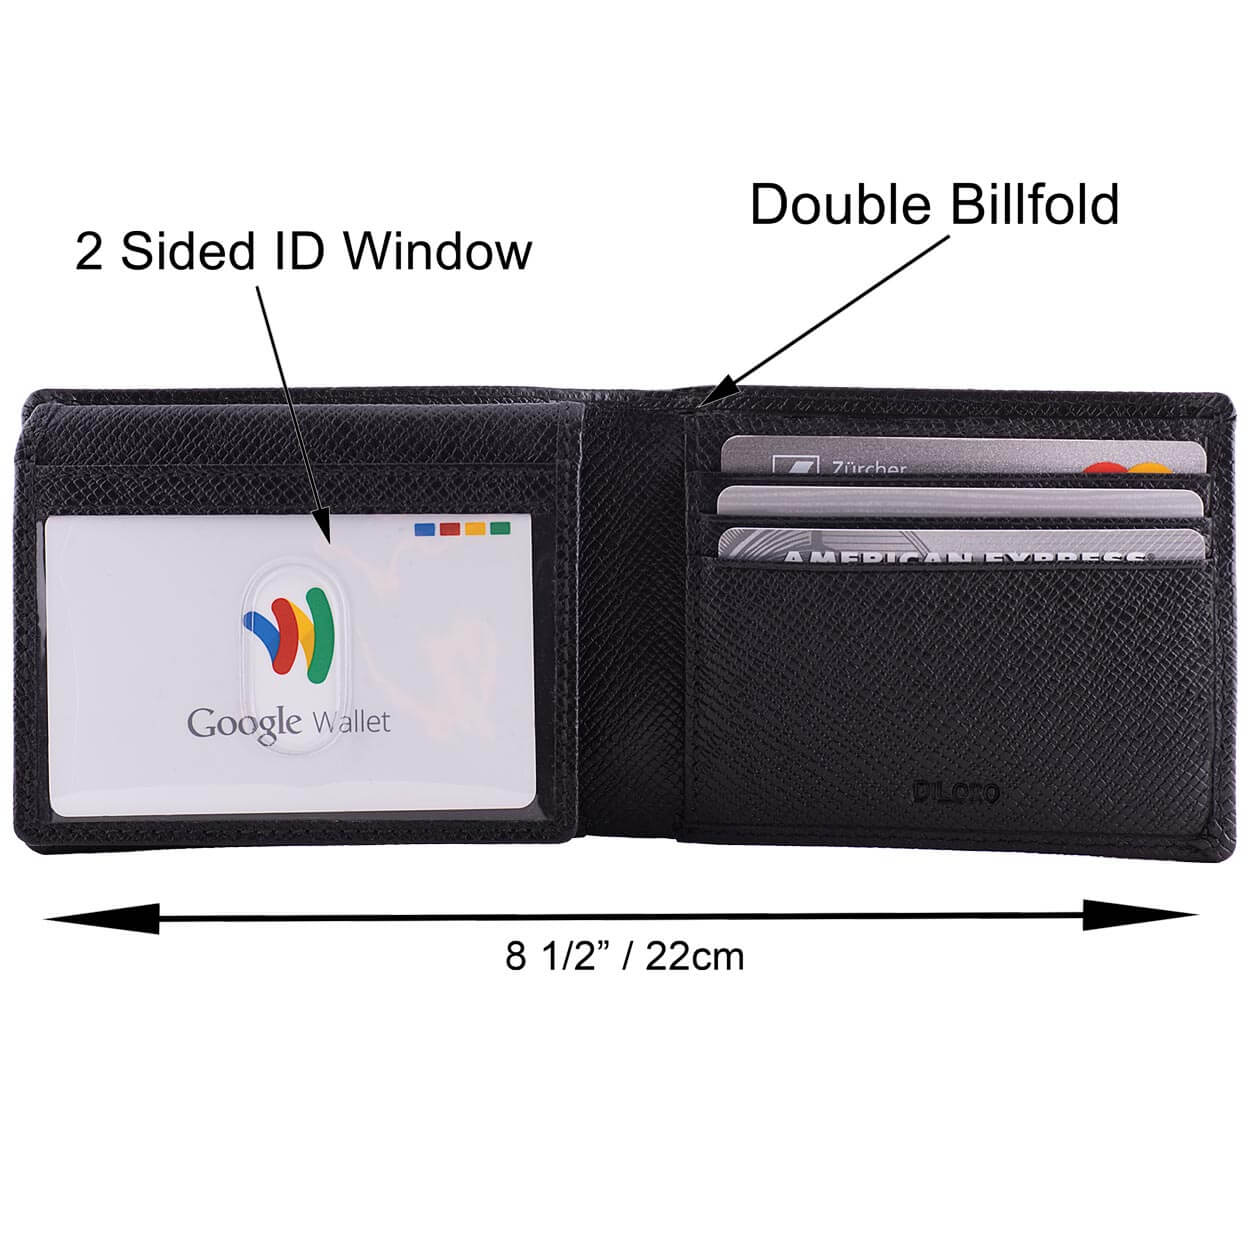 A slim bifold wallet made from genuine Saffiano leather with RFID blocking technology and two ID windows - Dimensions and Features